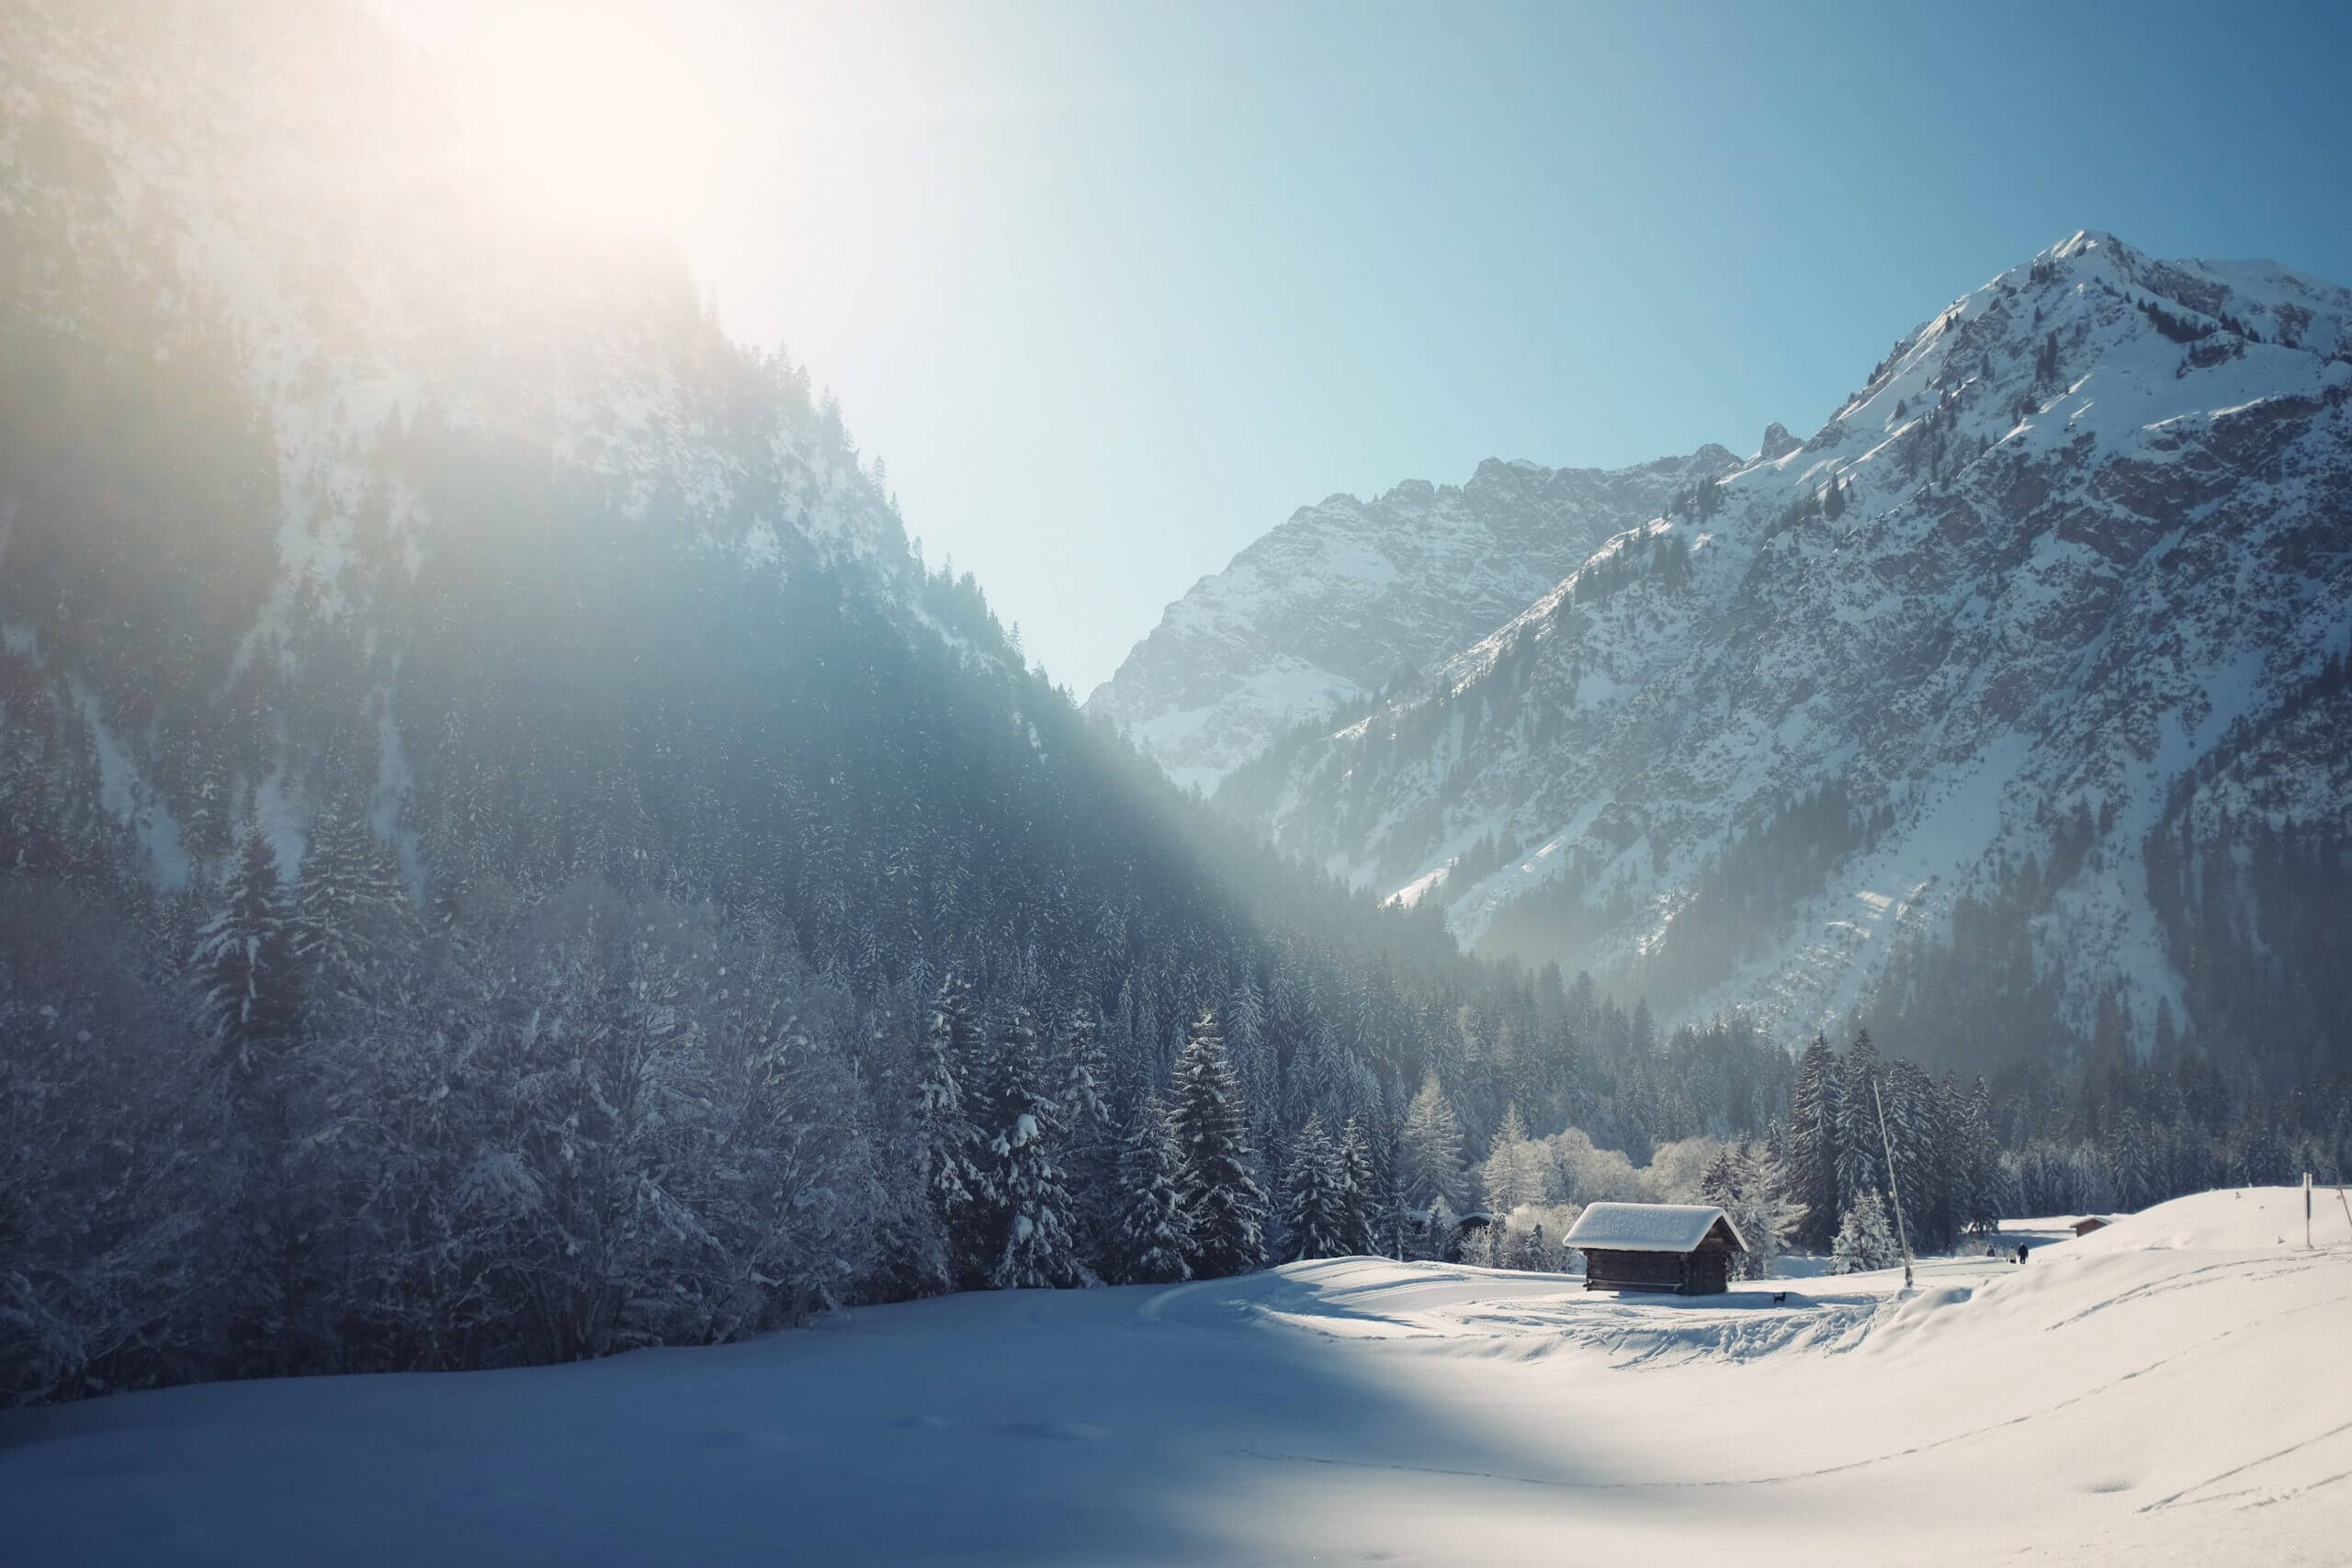 Image of crypto winter with cabin and beautiful mountains